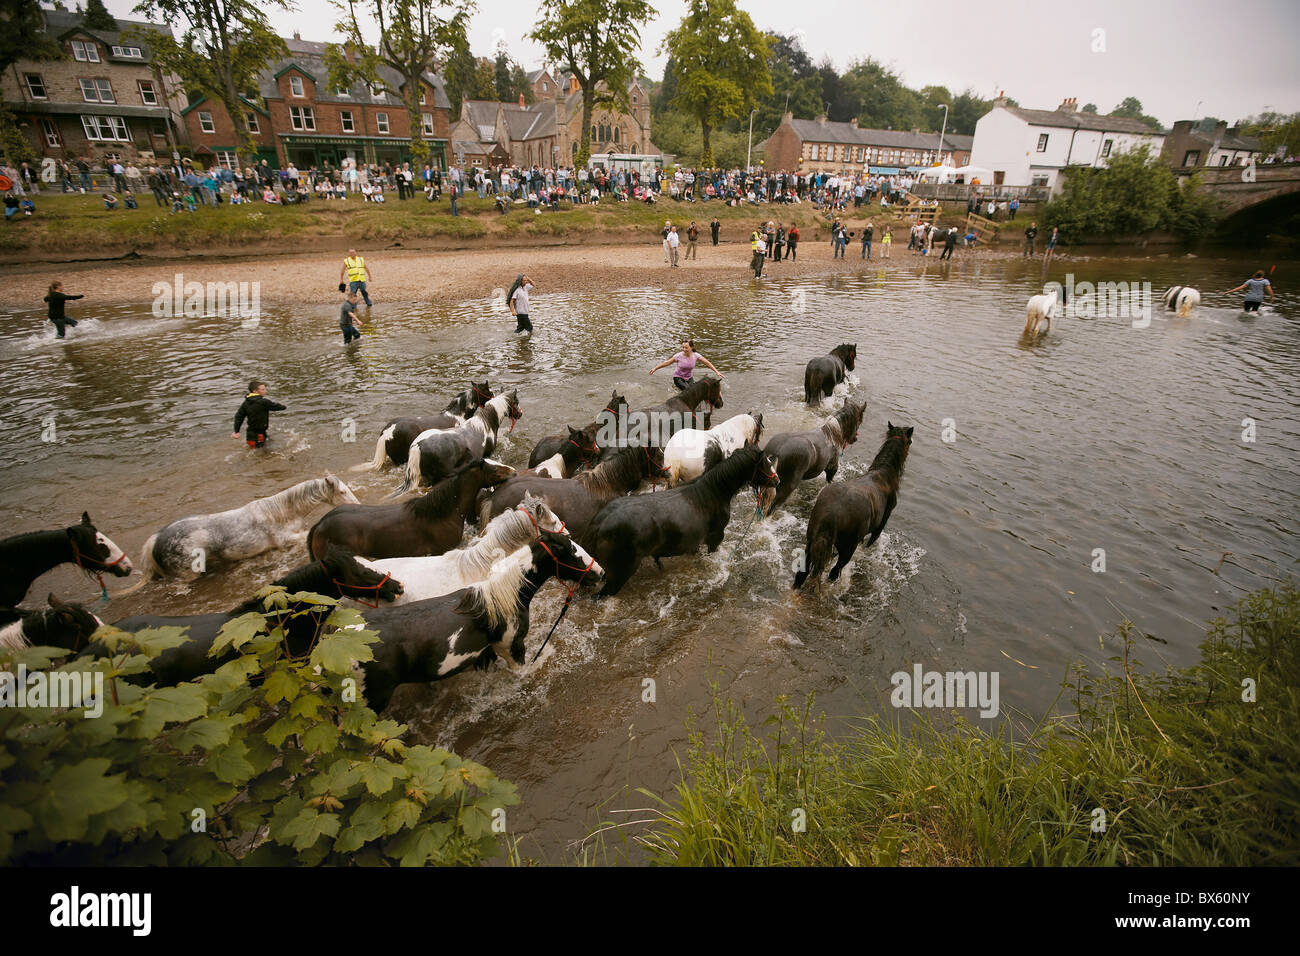 Gypsy travellers washing horses in the river Eden during the Appleby Horse Fair, Appleby-in-Westmorland, Cumbria, UK Stock Photo